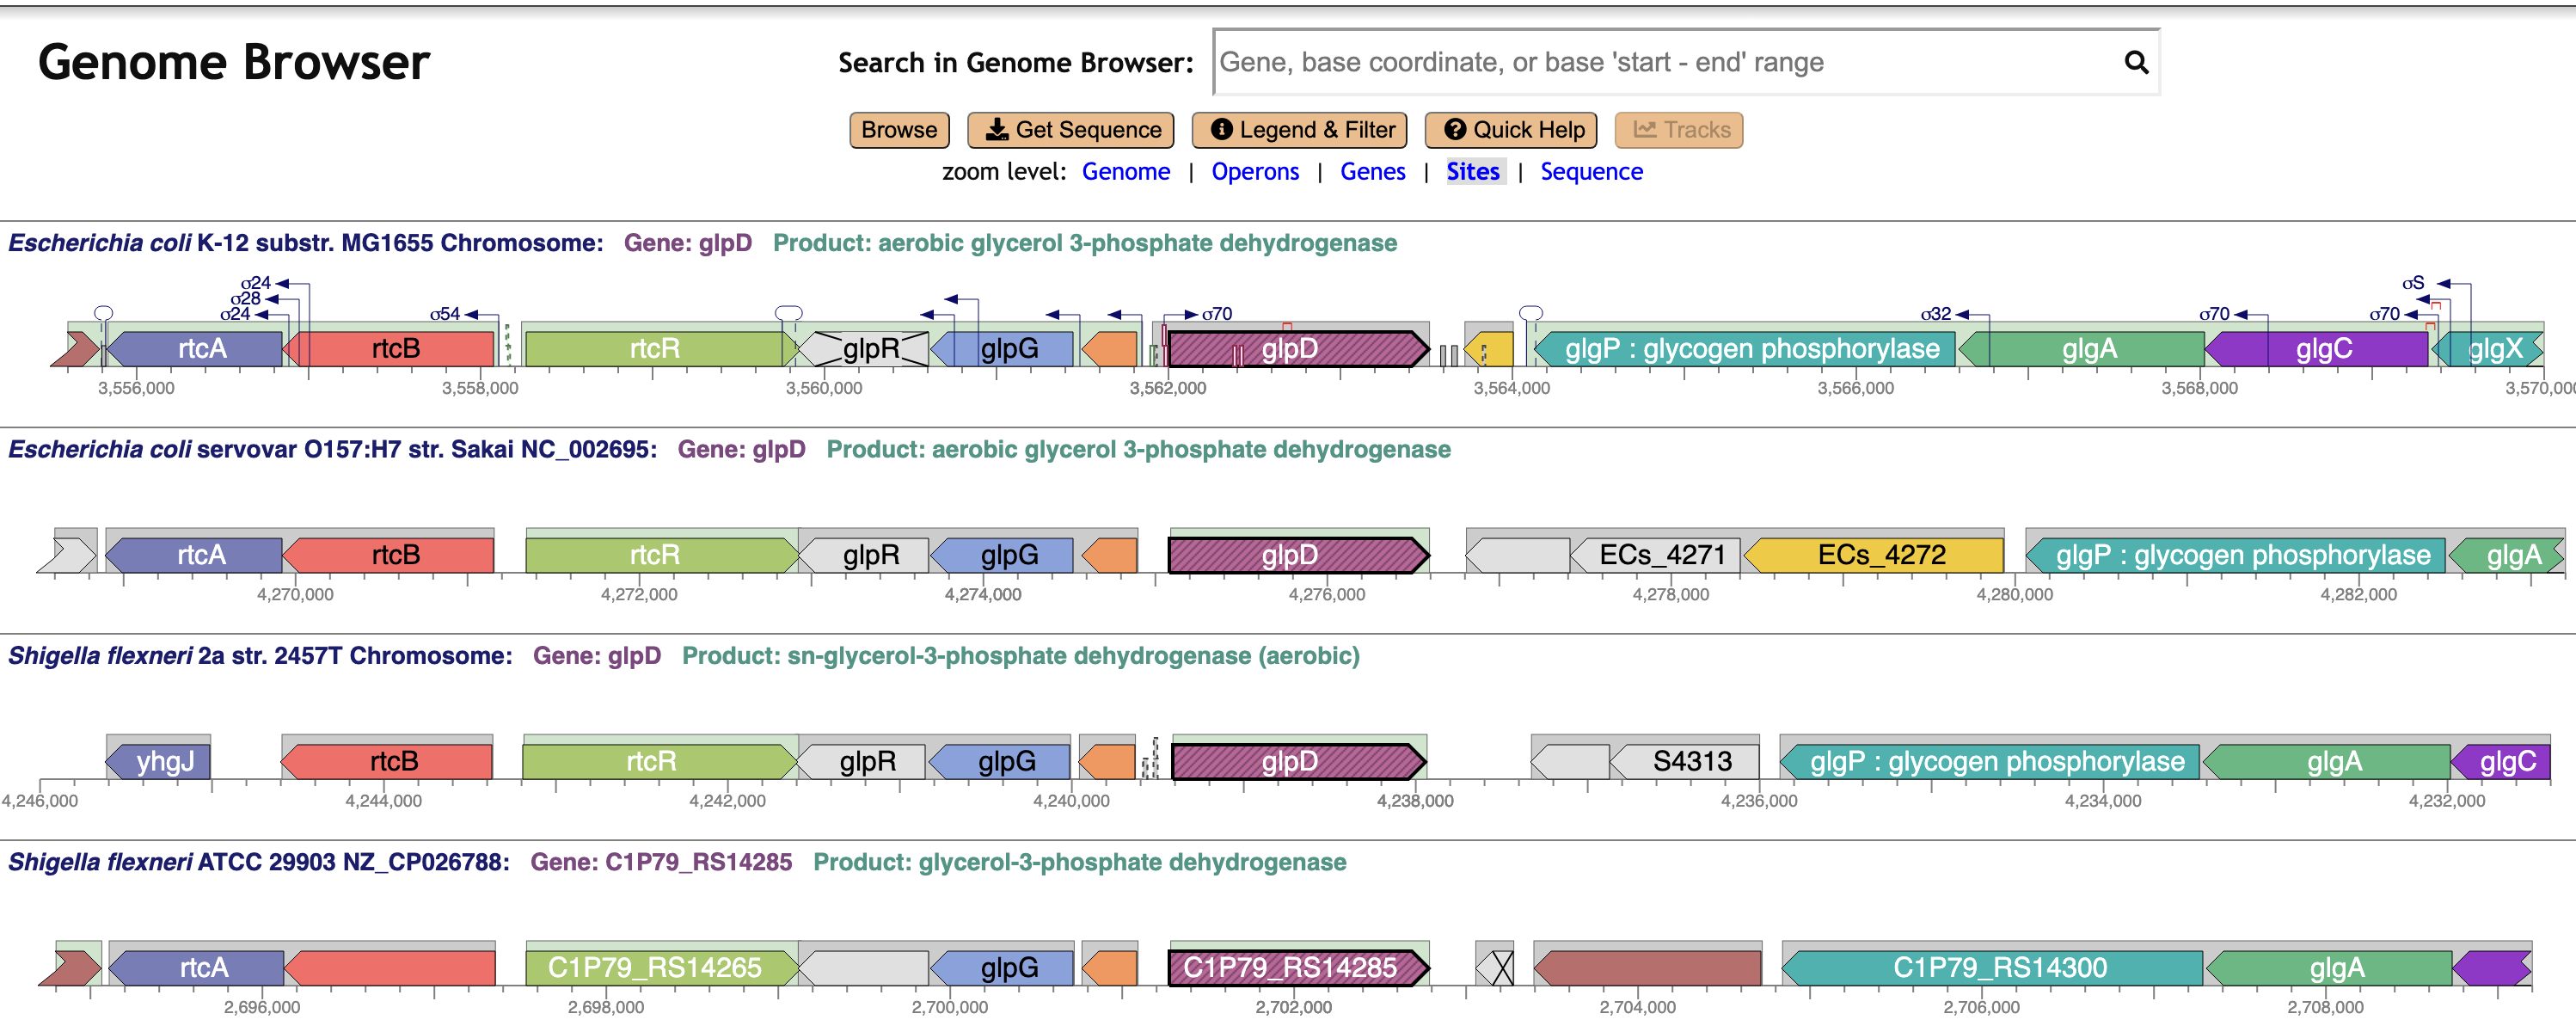 Comparative Genome Browser Image